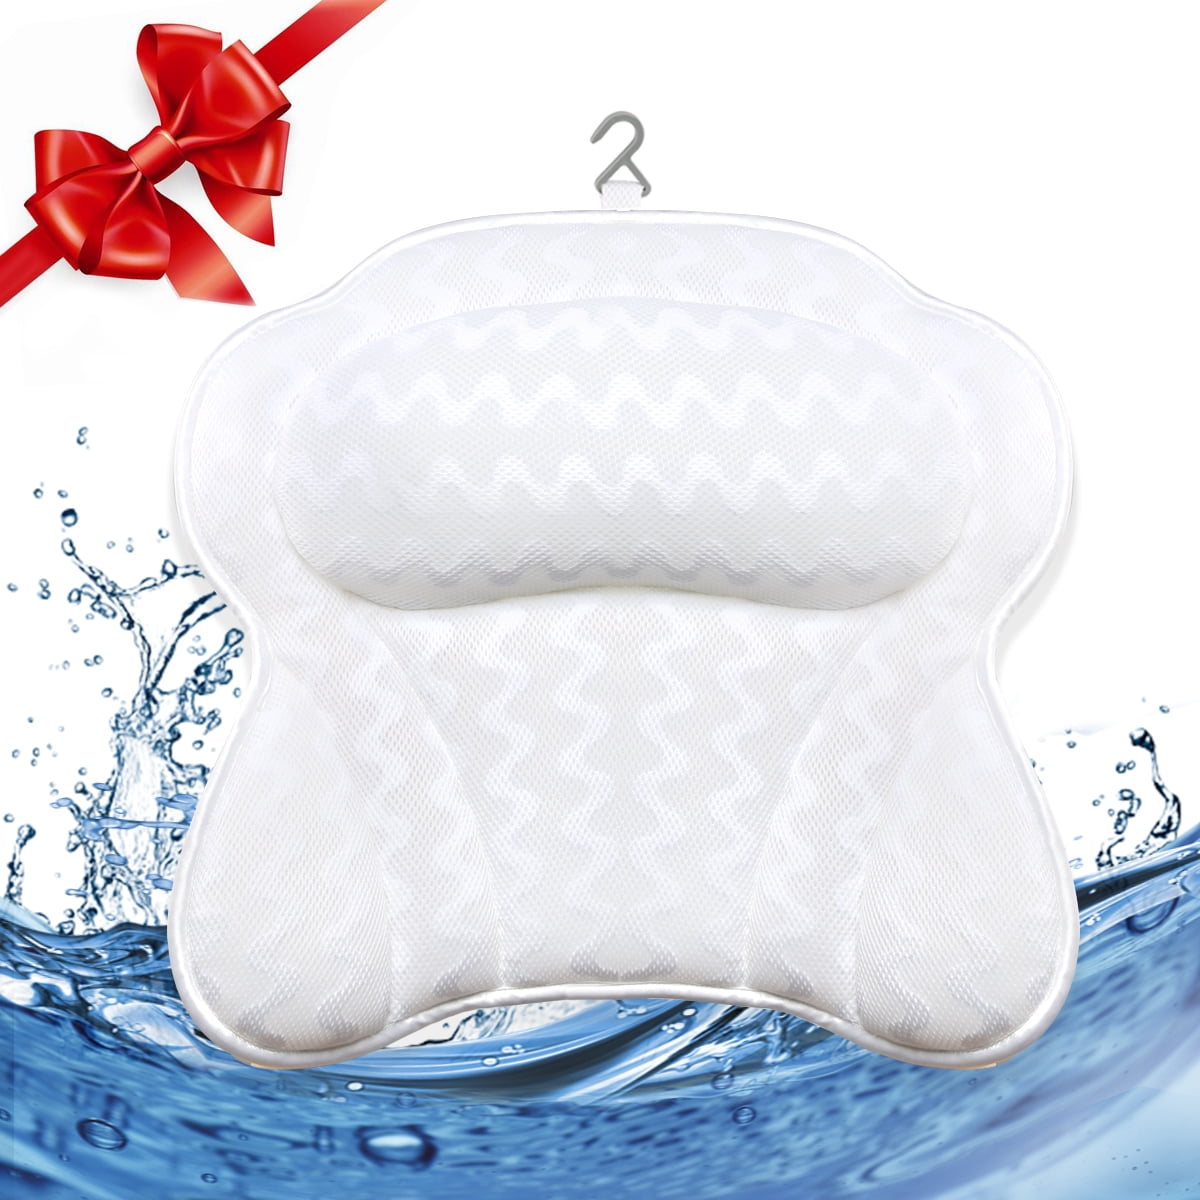 3D Mesh Bath Pillow Spa Pillow Head Rest for Hot Tub Bathtub with 6 Suction Cup 